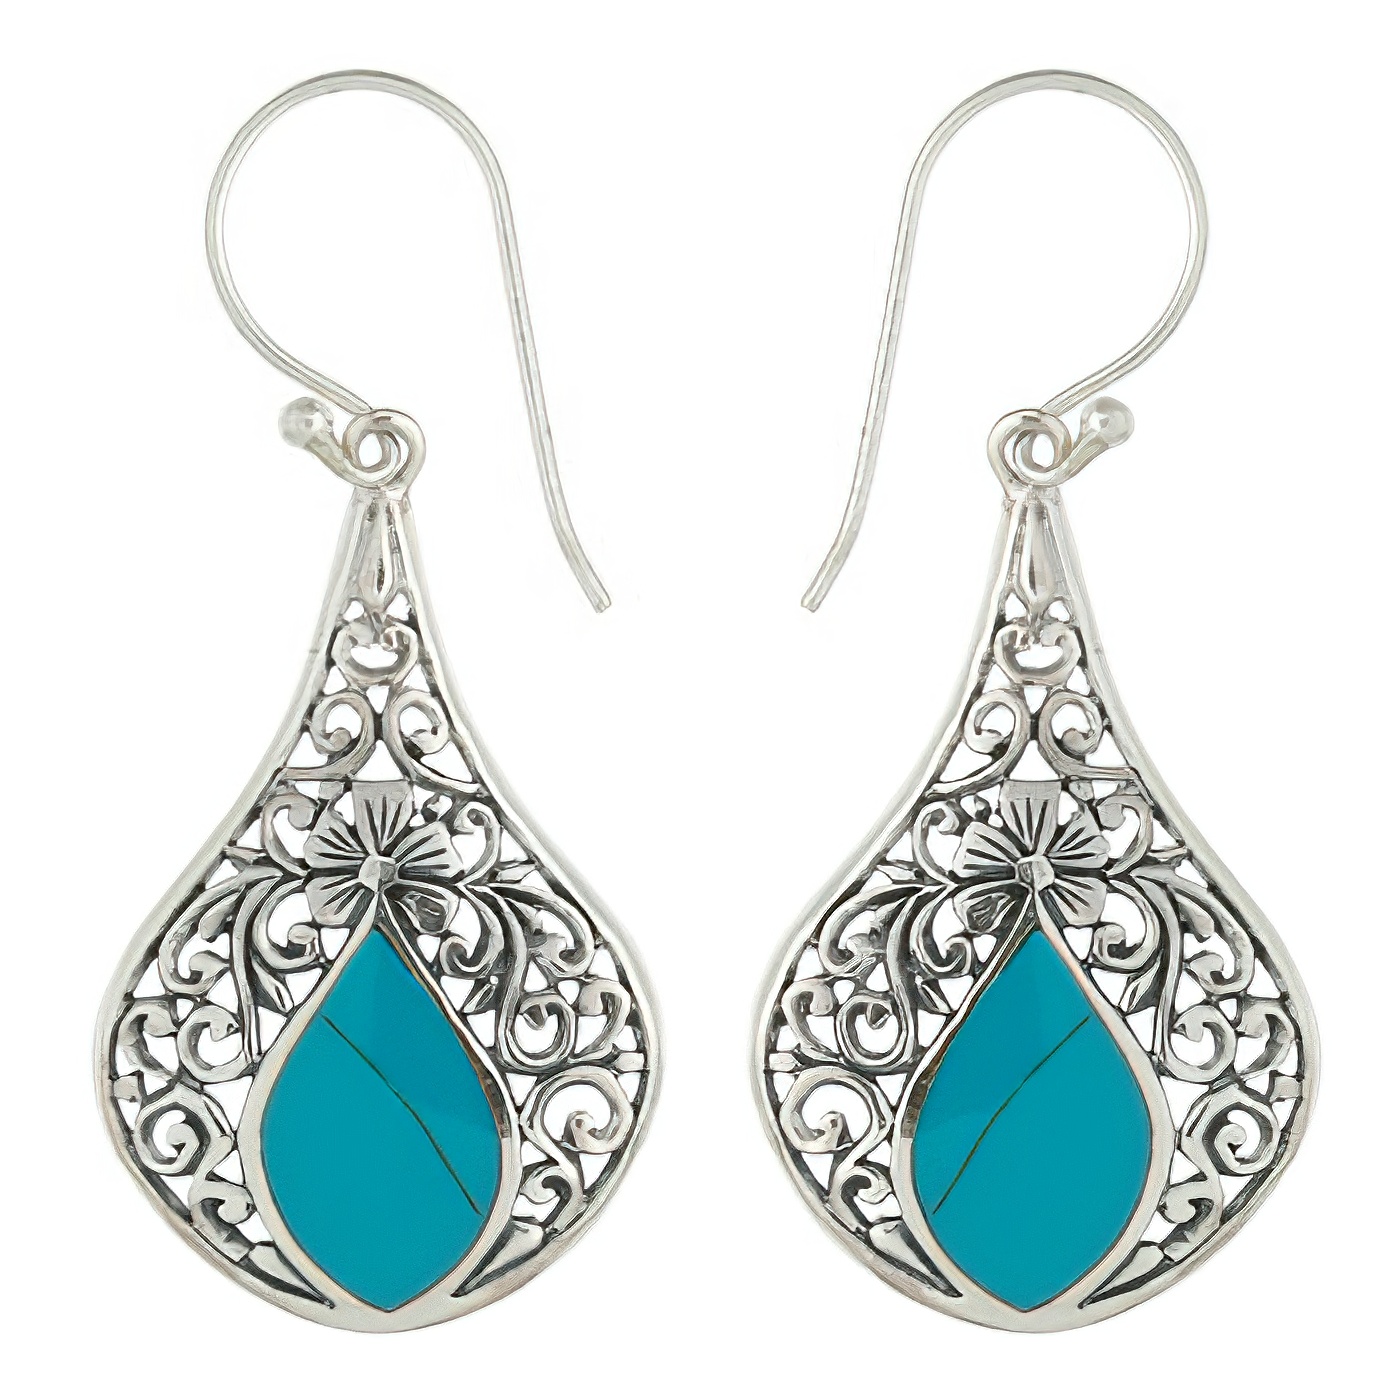 Synthetic Turquoise Dangle Earrings with Floral Antiqued Design by BeYindi 